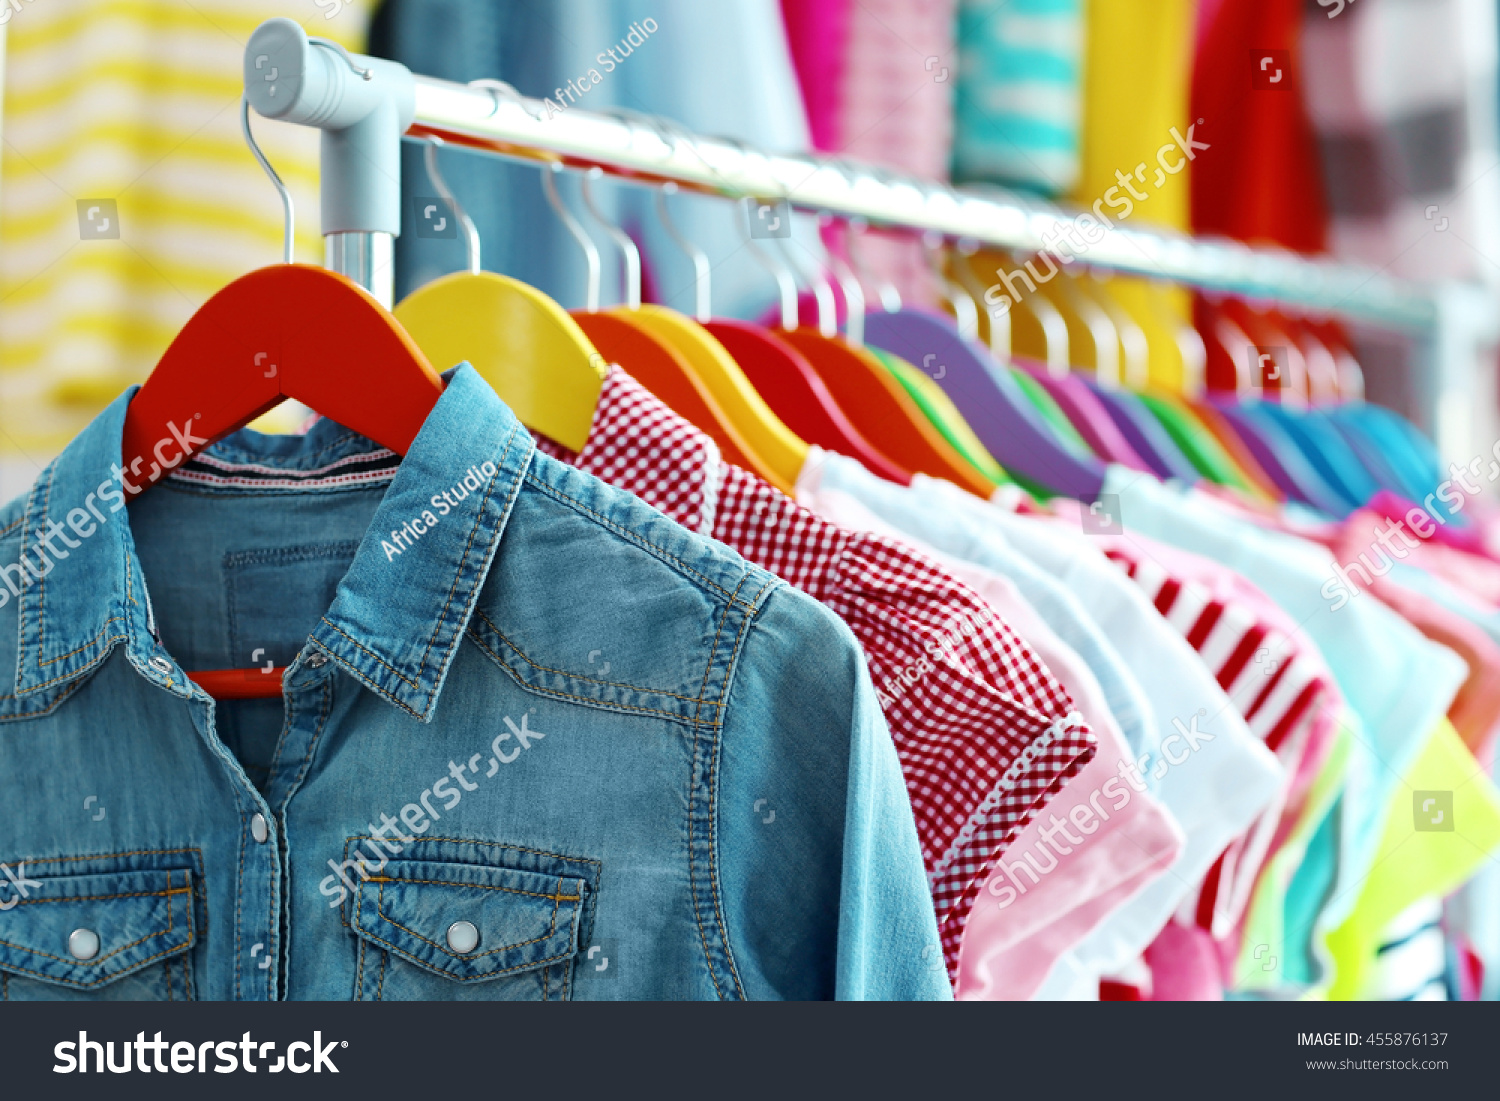 stock-photo-children-clothes-hanging-on-hangers-in-the-shop-455876137 – The  Clothesline